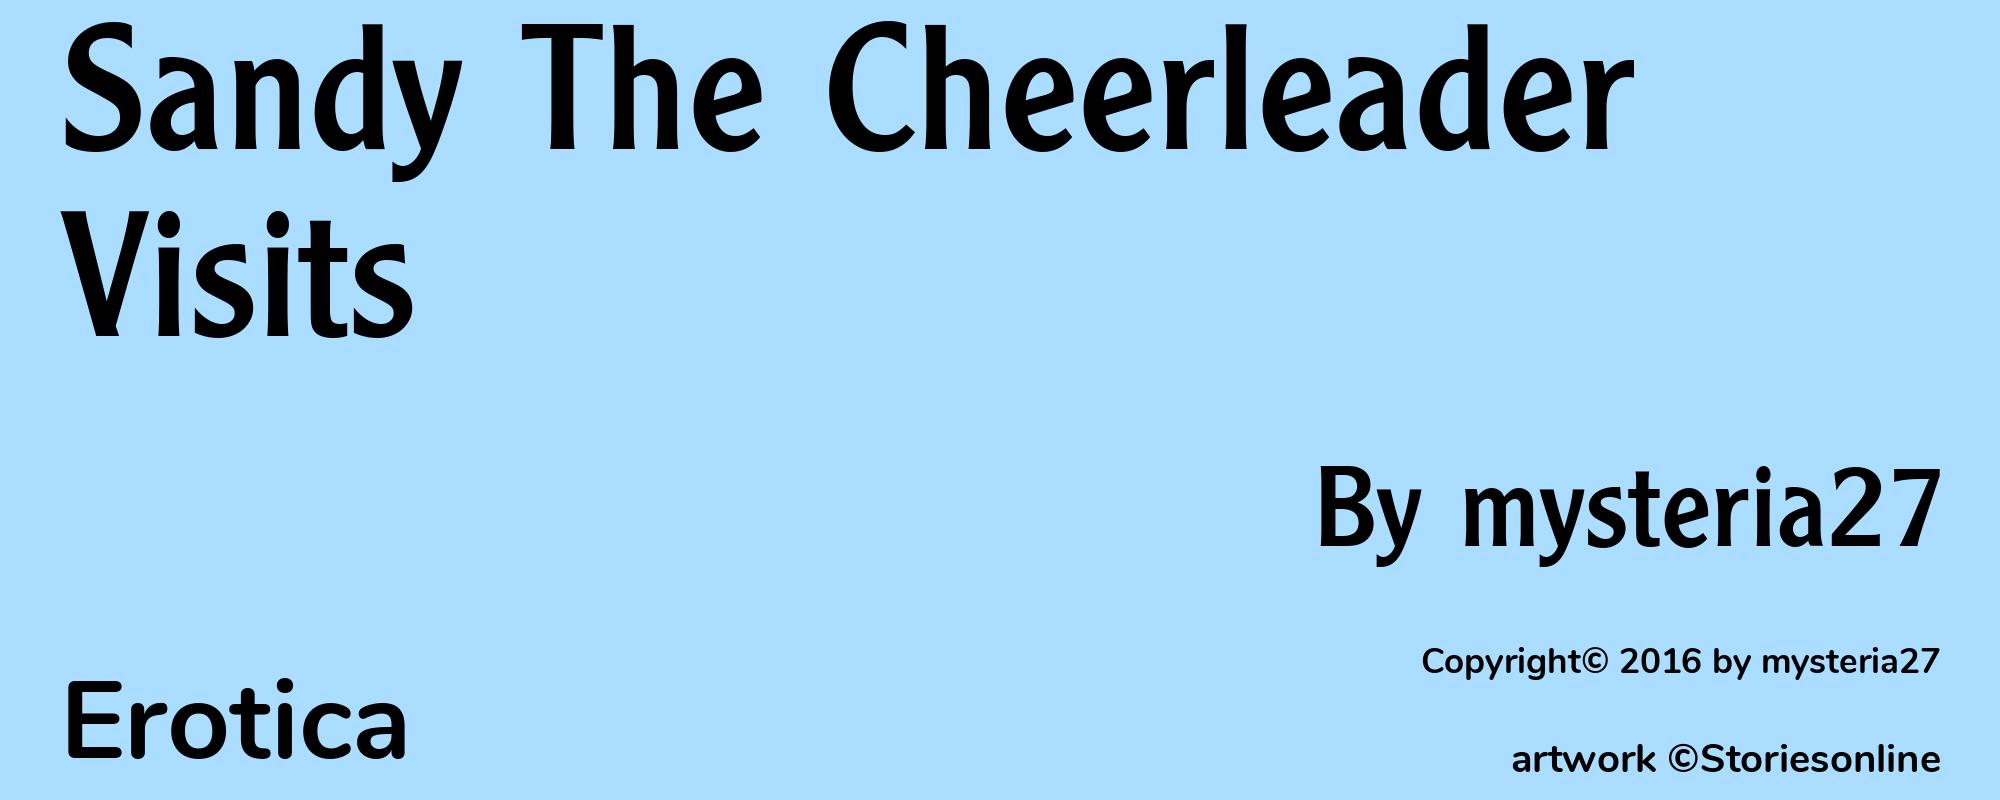 Sandy The Cheerleader Visits - Cover